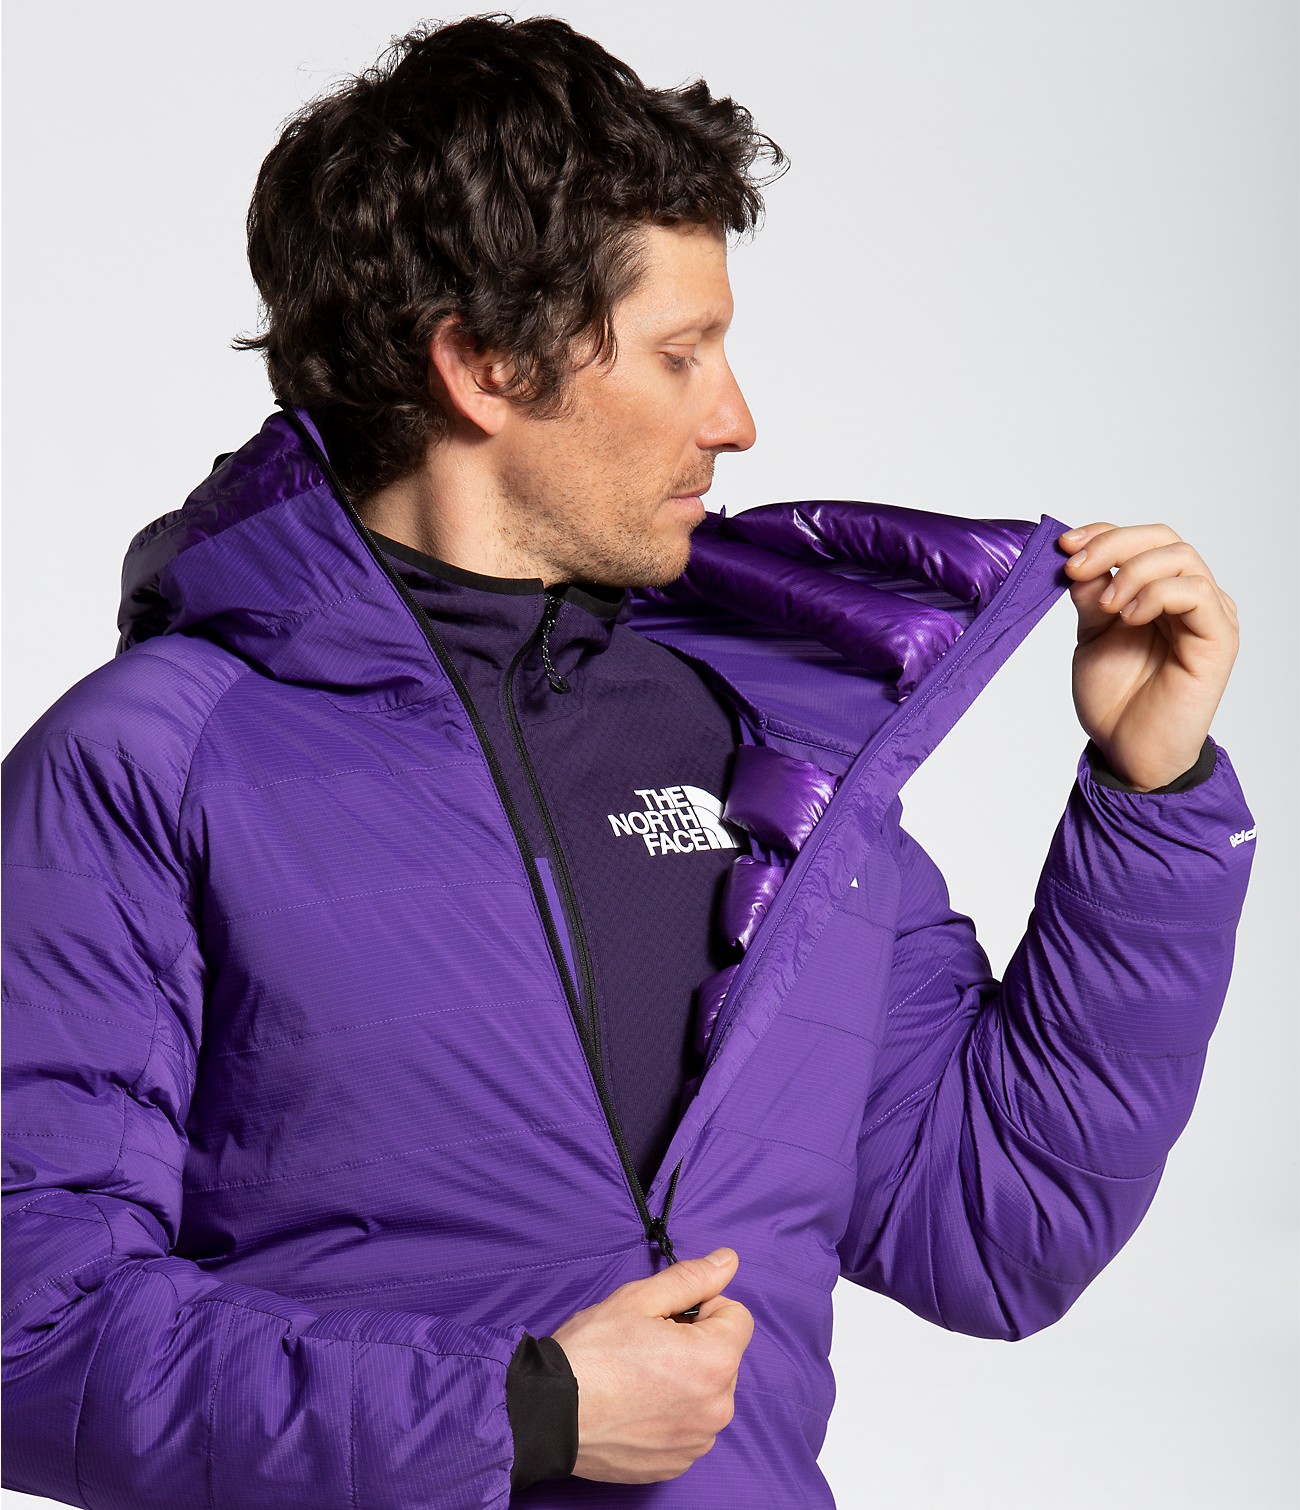 Summit Series Advanced Mountain Kit L3 Pullover Hoodie | The North Face